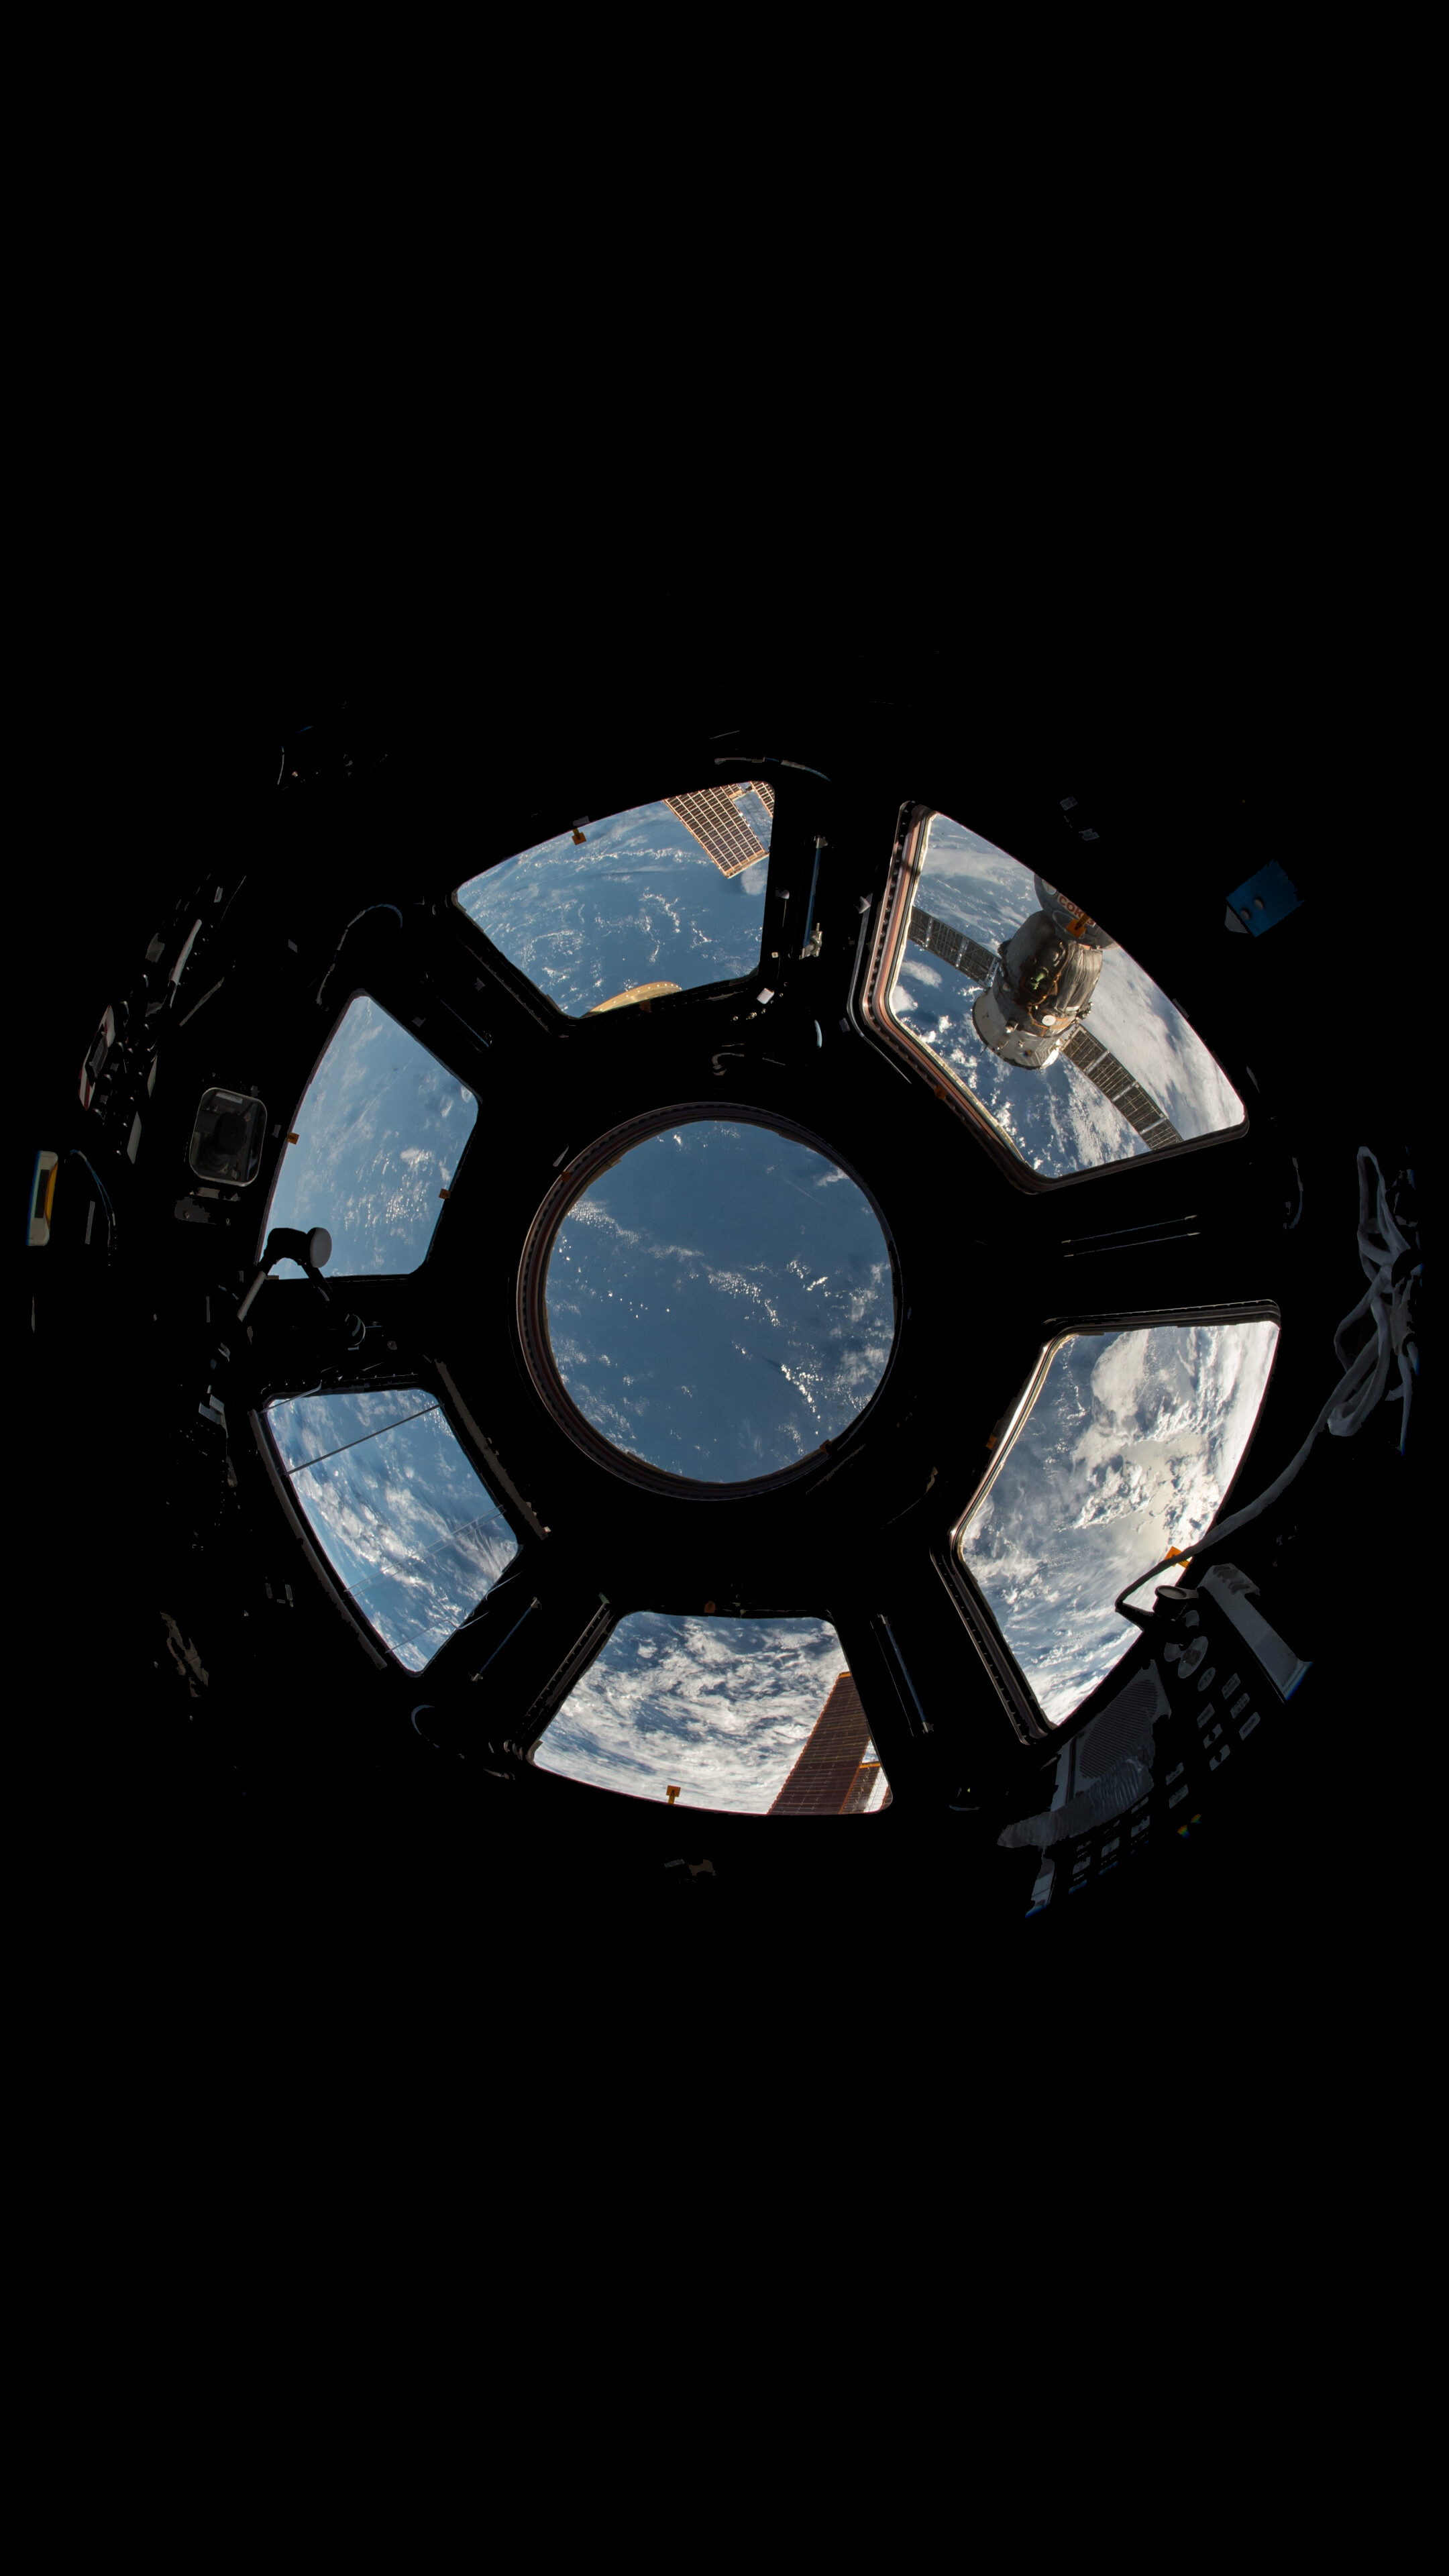 International Space Station: Space and astronomy, A large spacecraft in low Earth orbit. 2160x3840 4K Wallpaper.